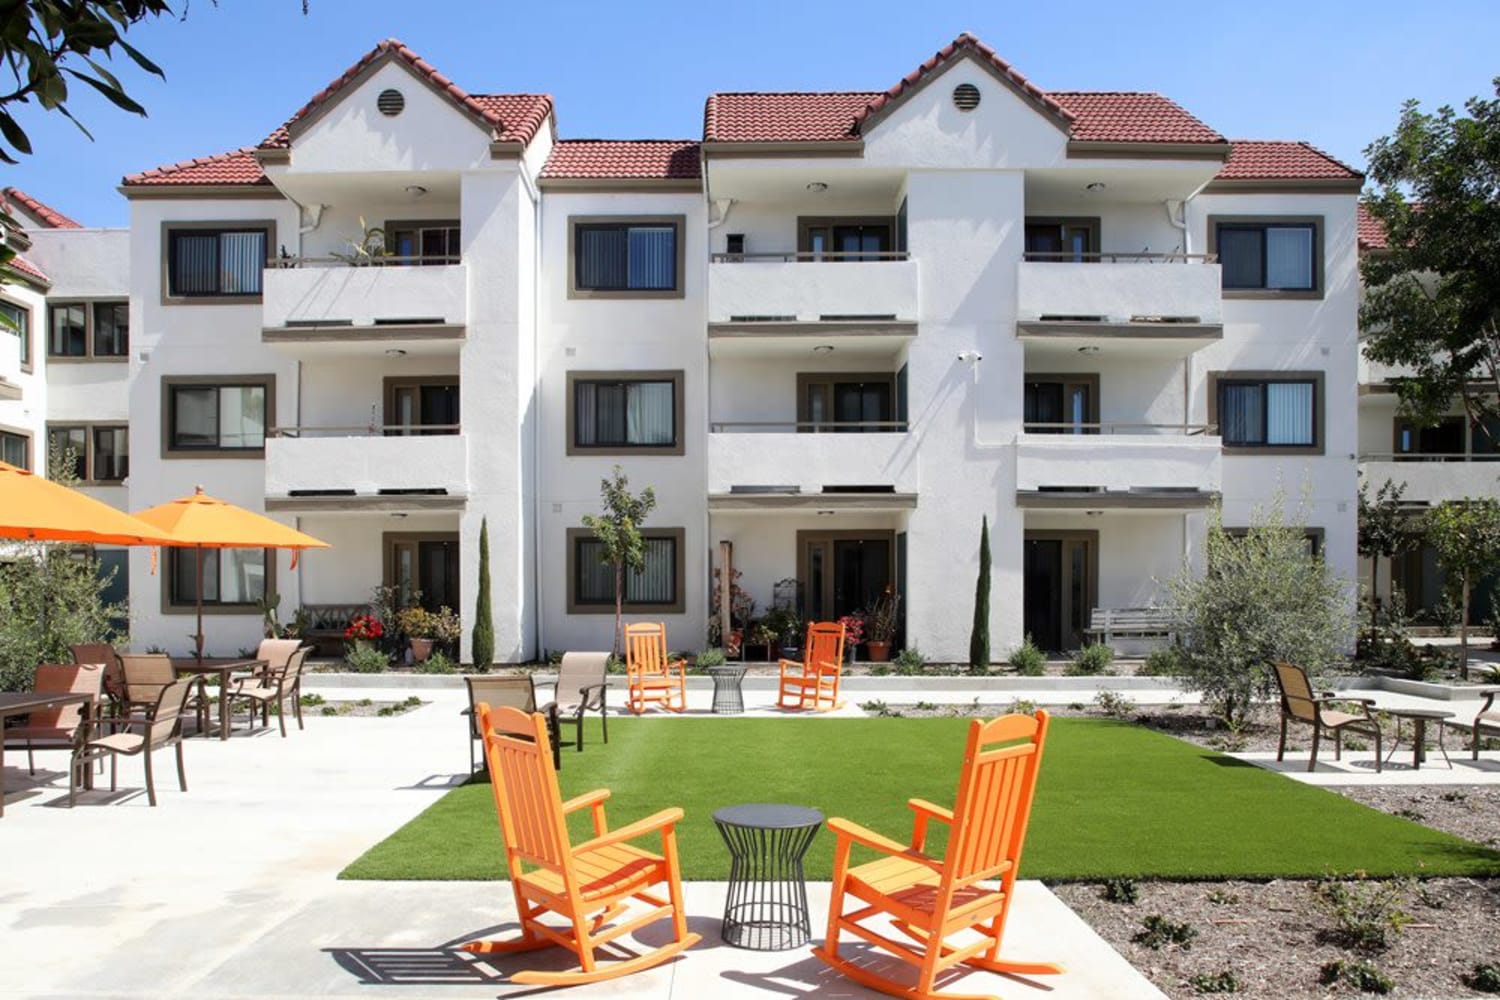 Outdoor area with tables, chairs and umbrellas at Sunny Garden Apartments in La Puente, California